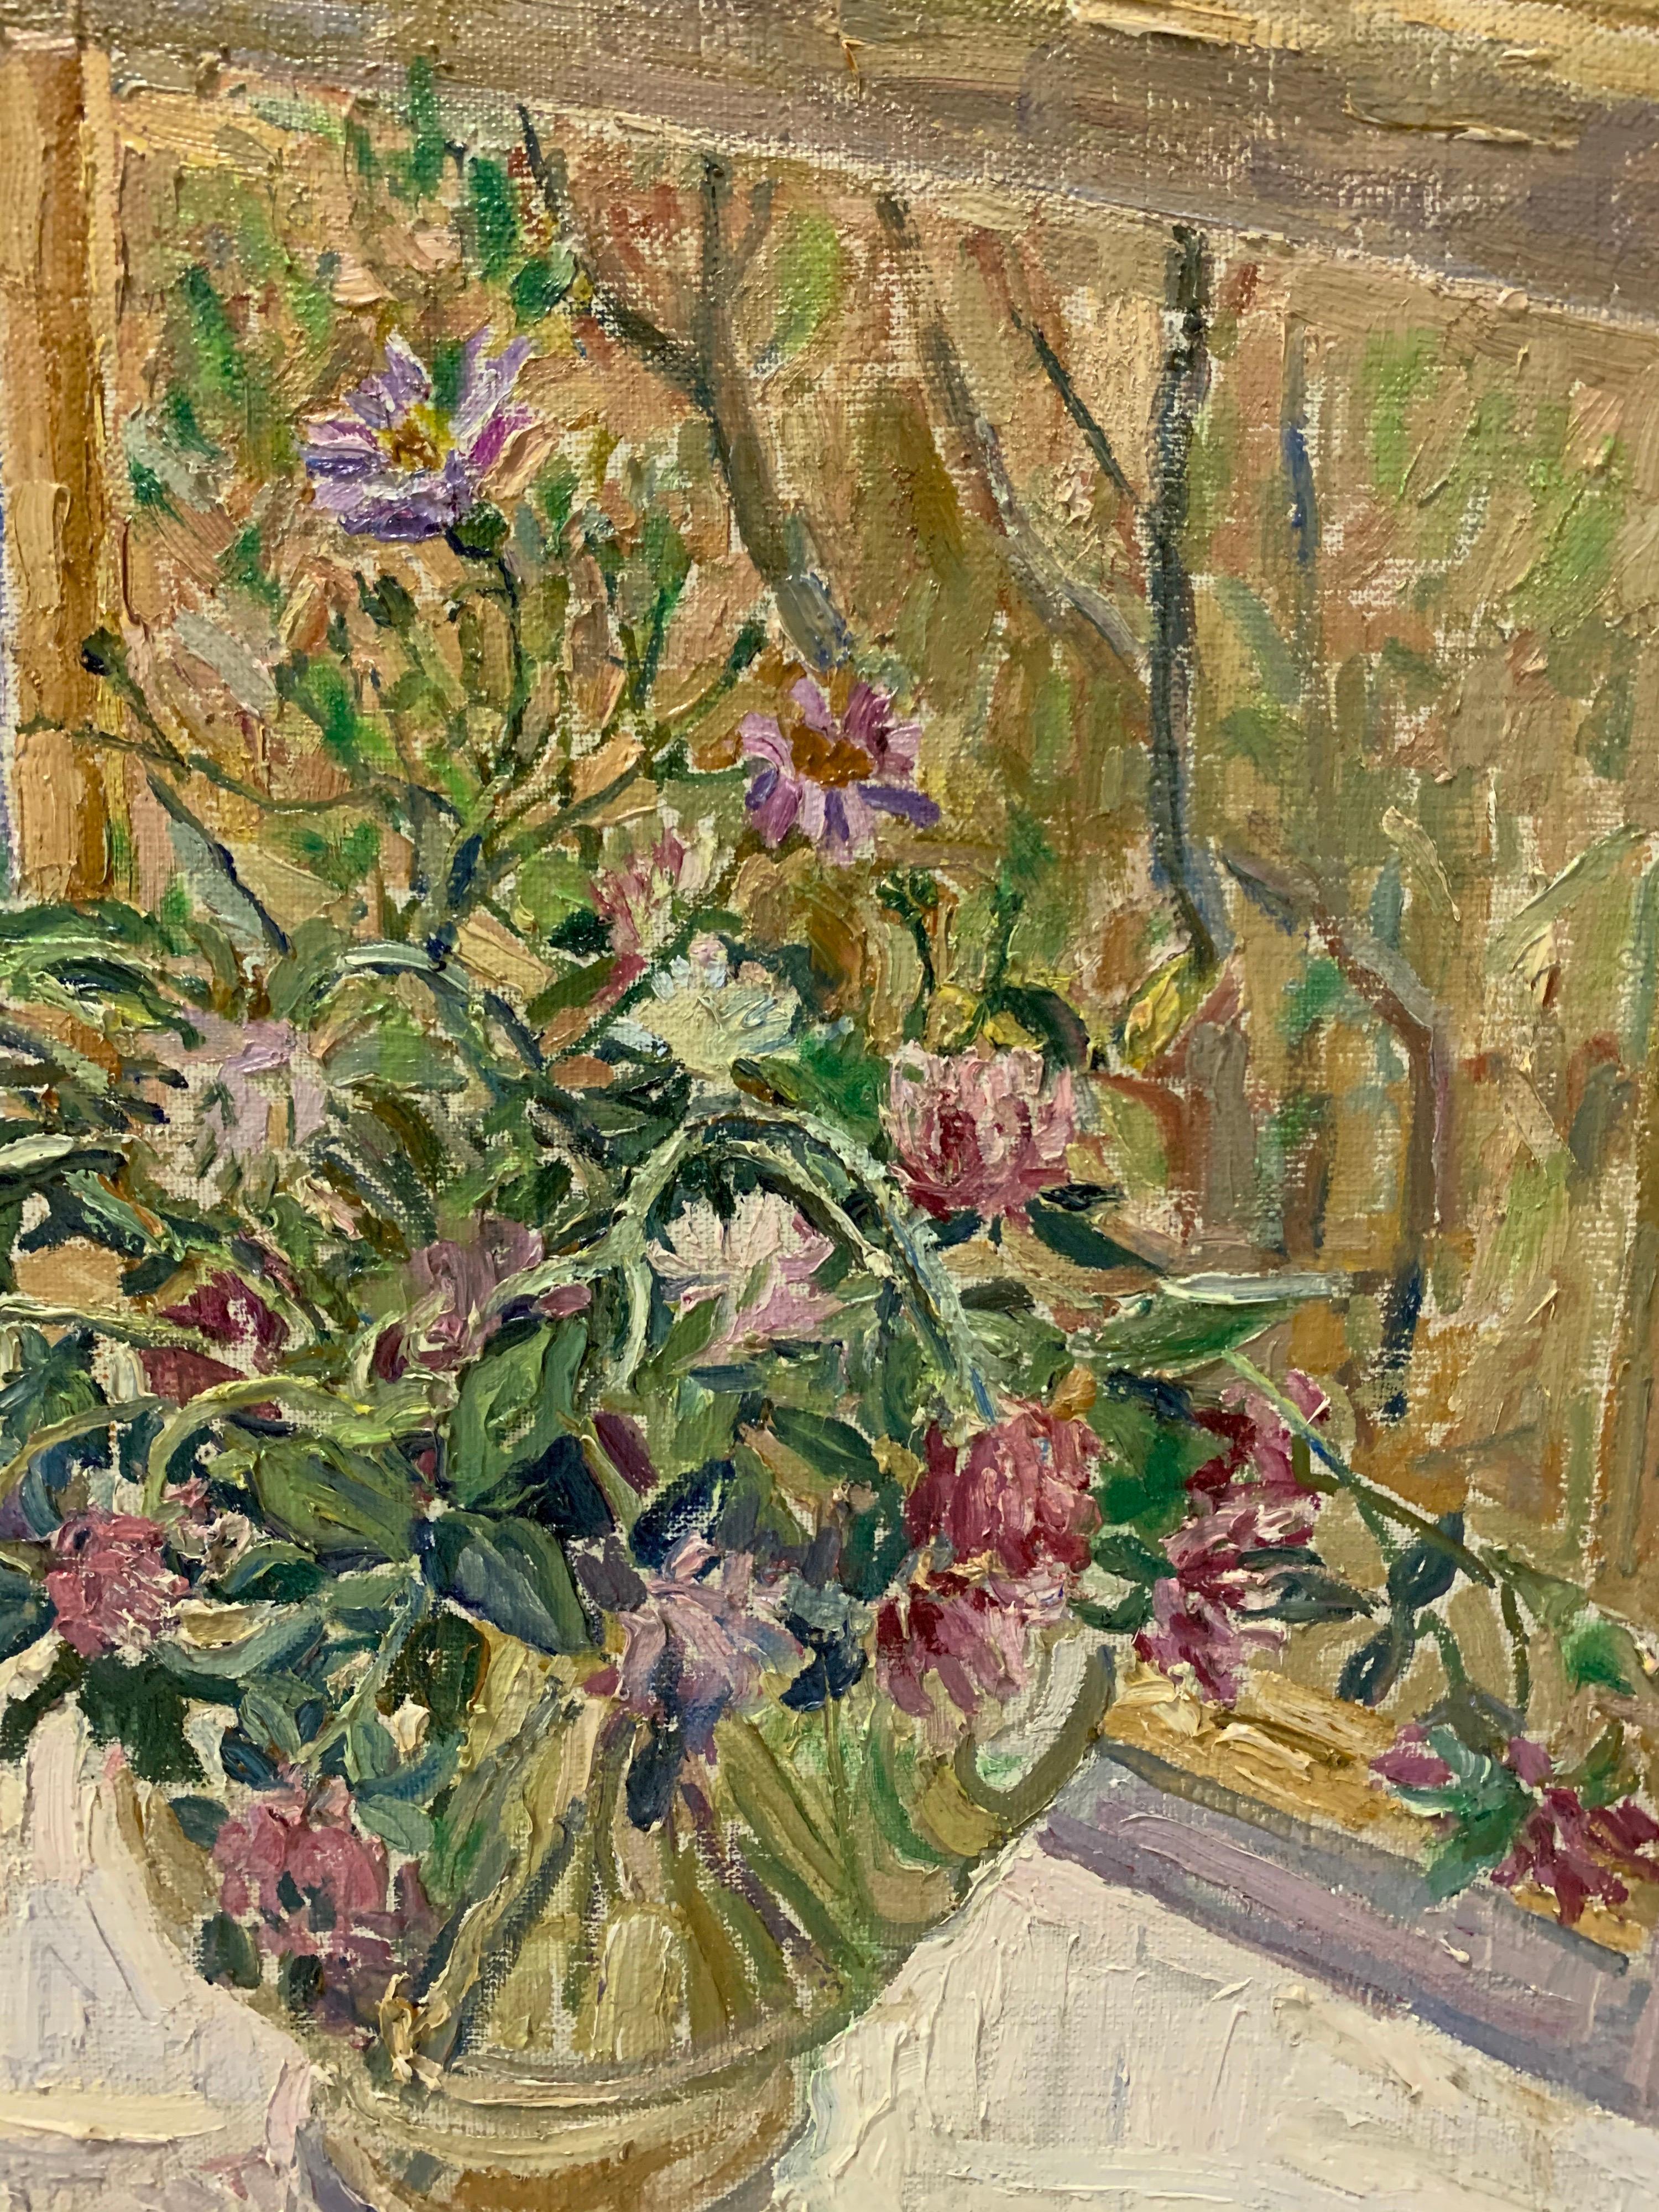 window with flowers painting